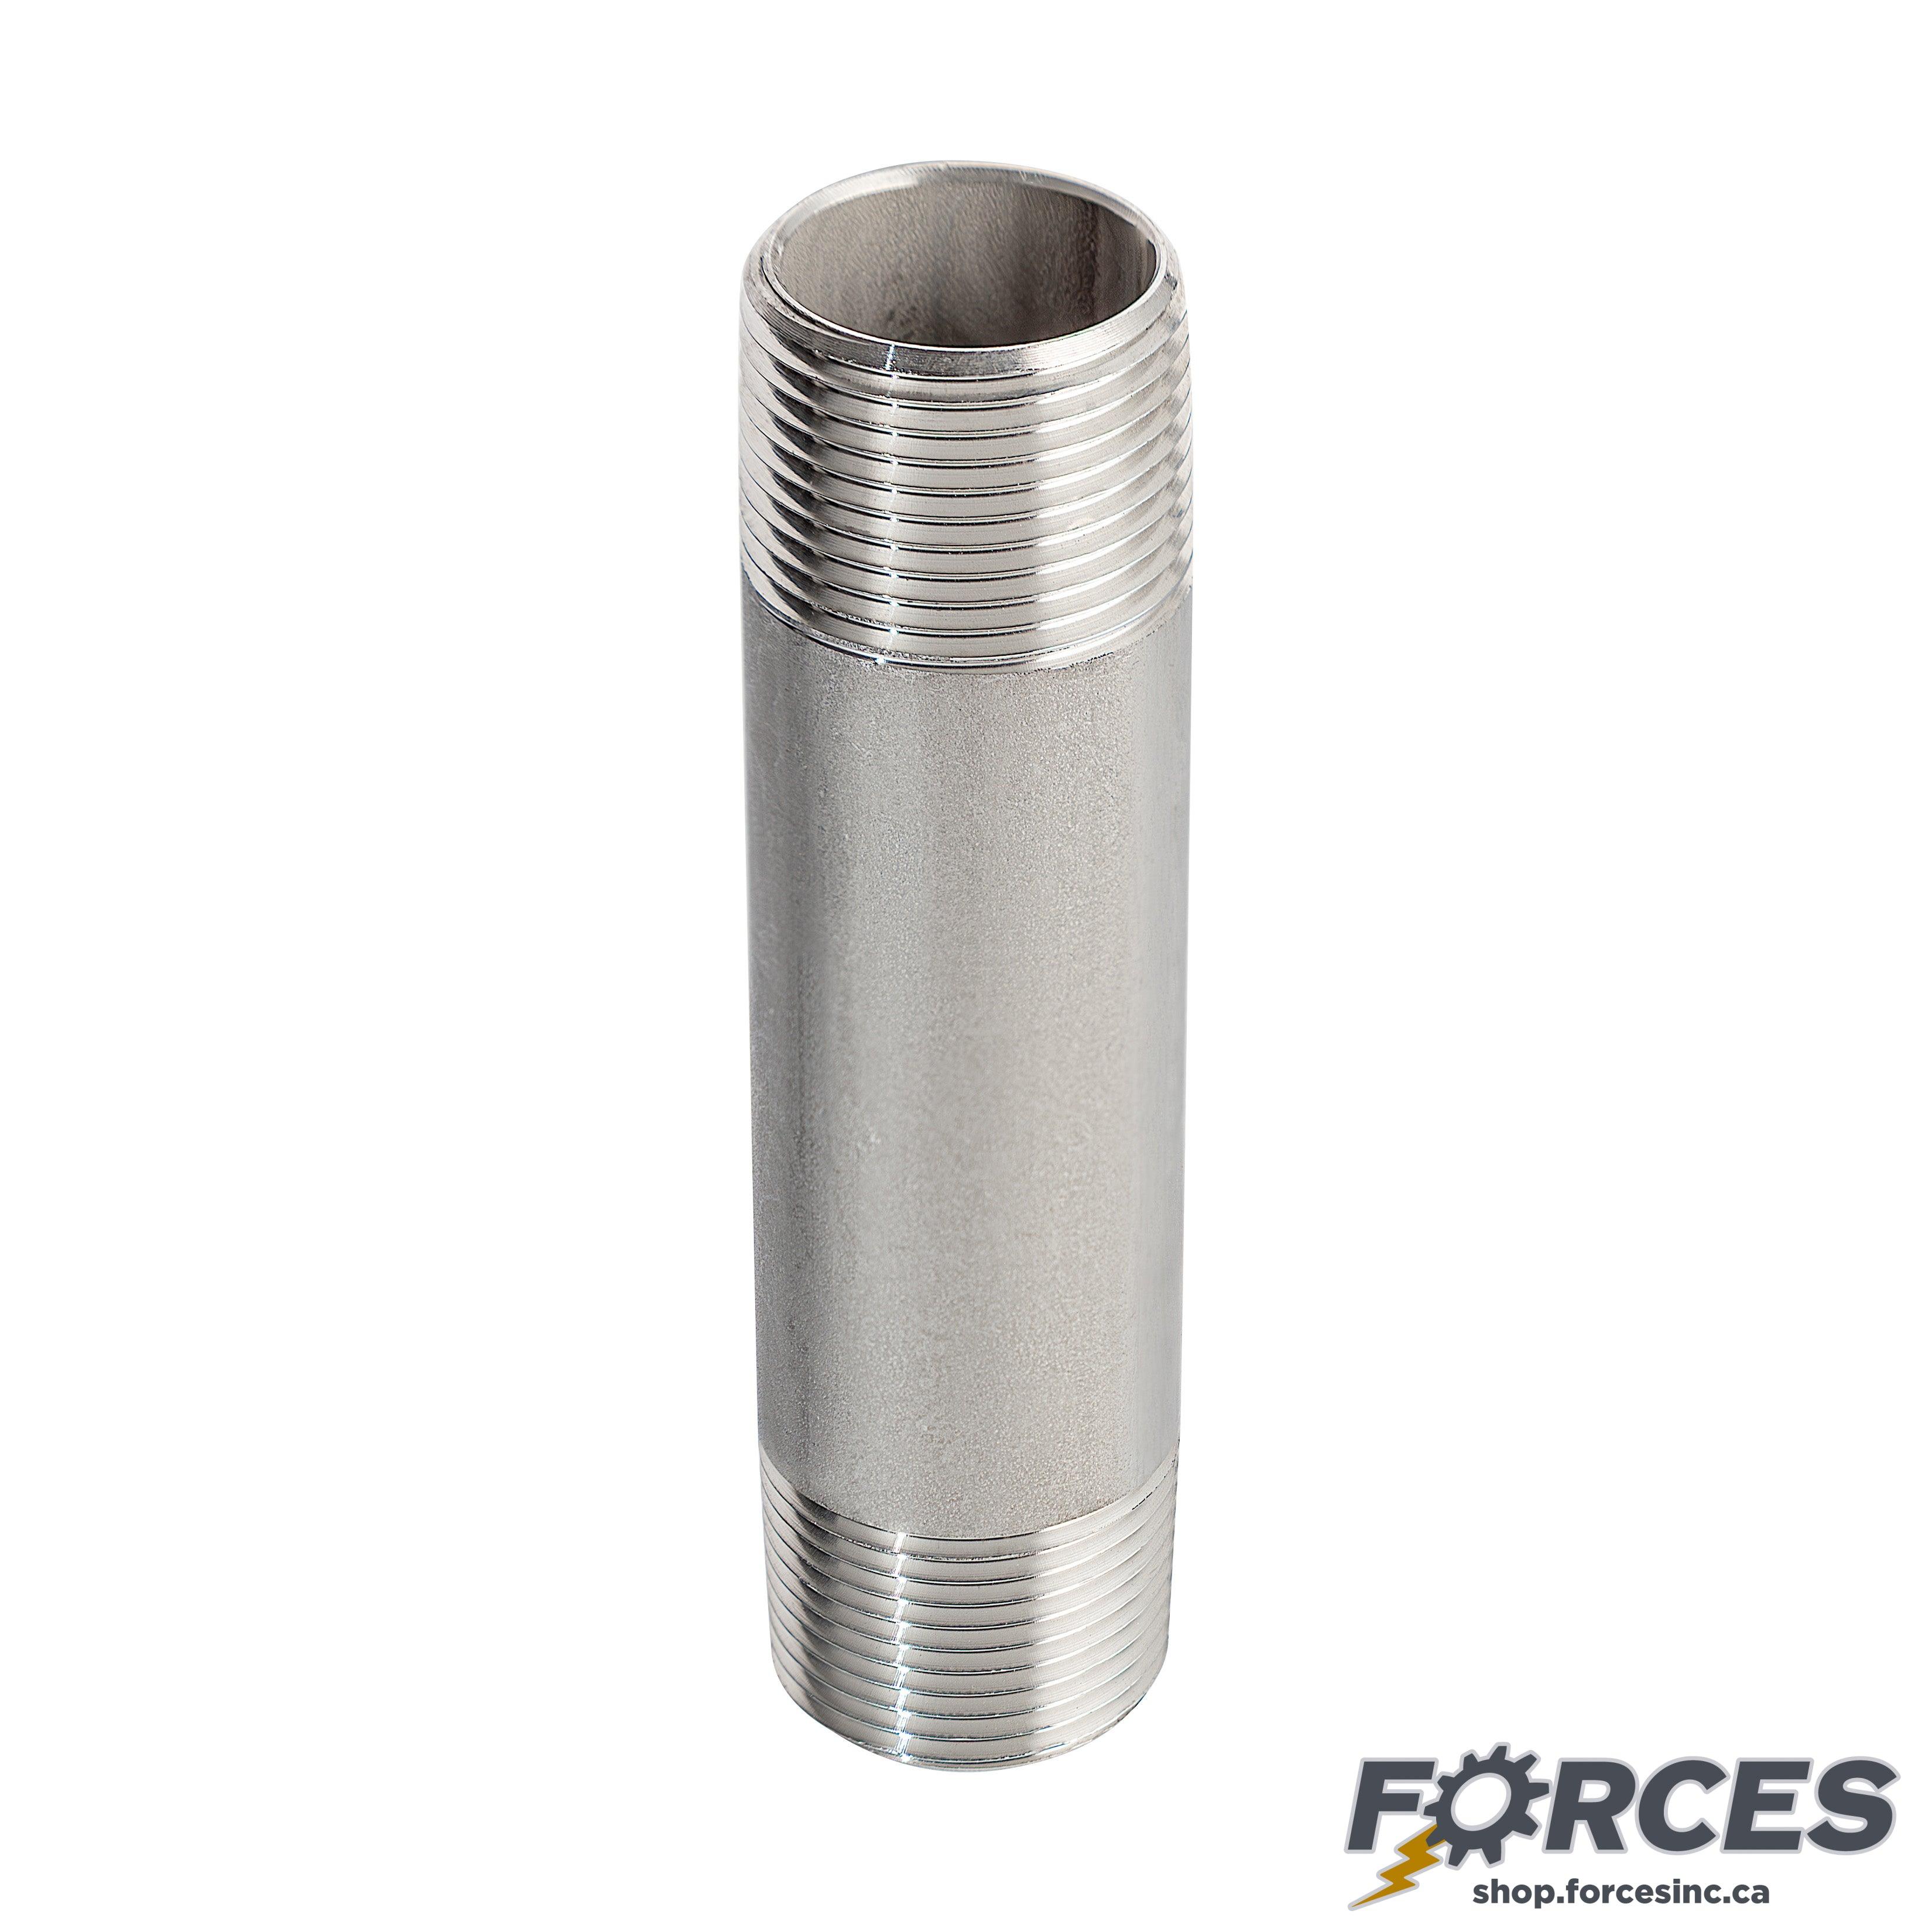 2" X 3" Long Nipple - Stainless Steel 316 - Forces Inc